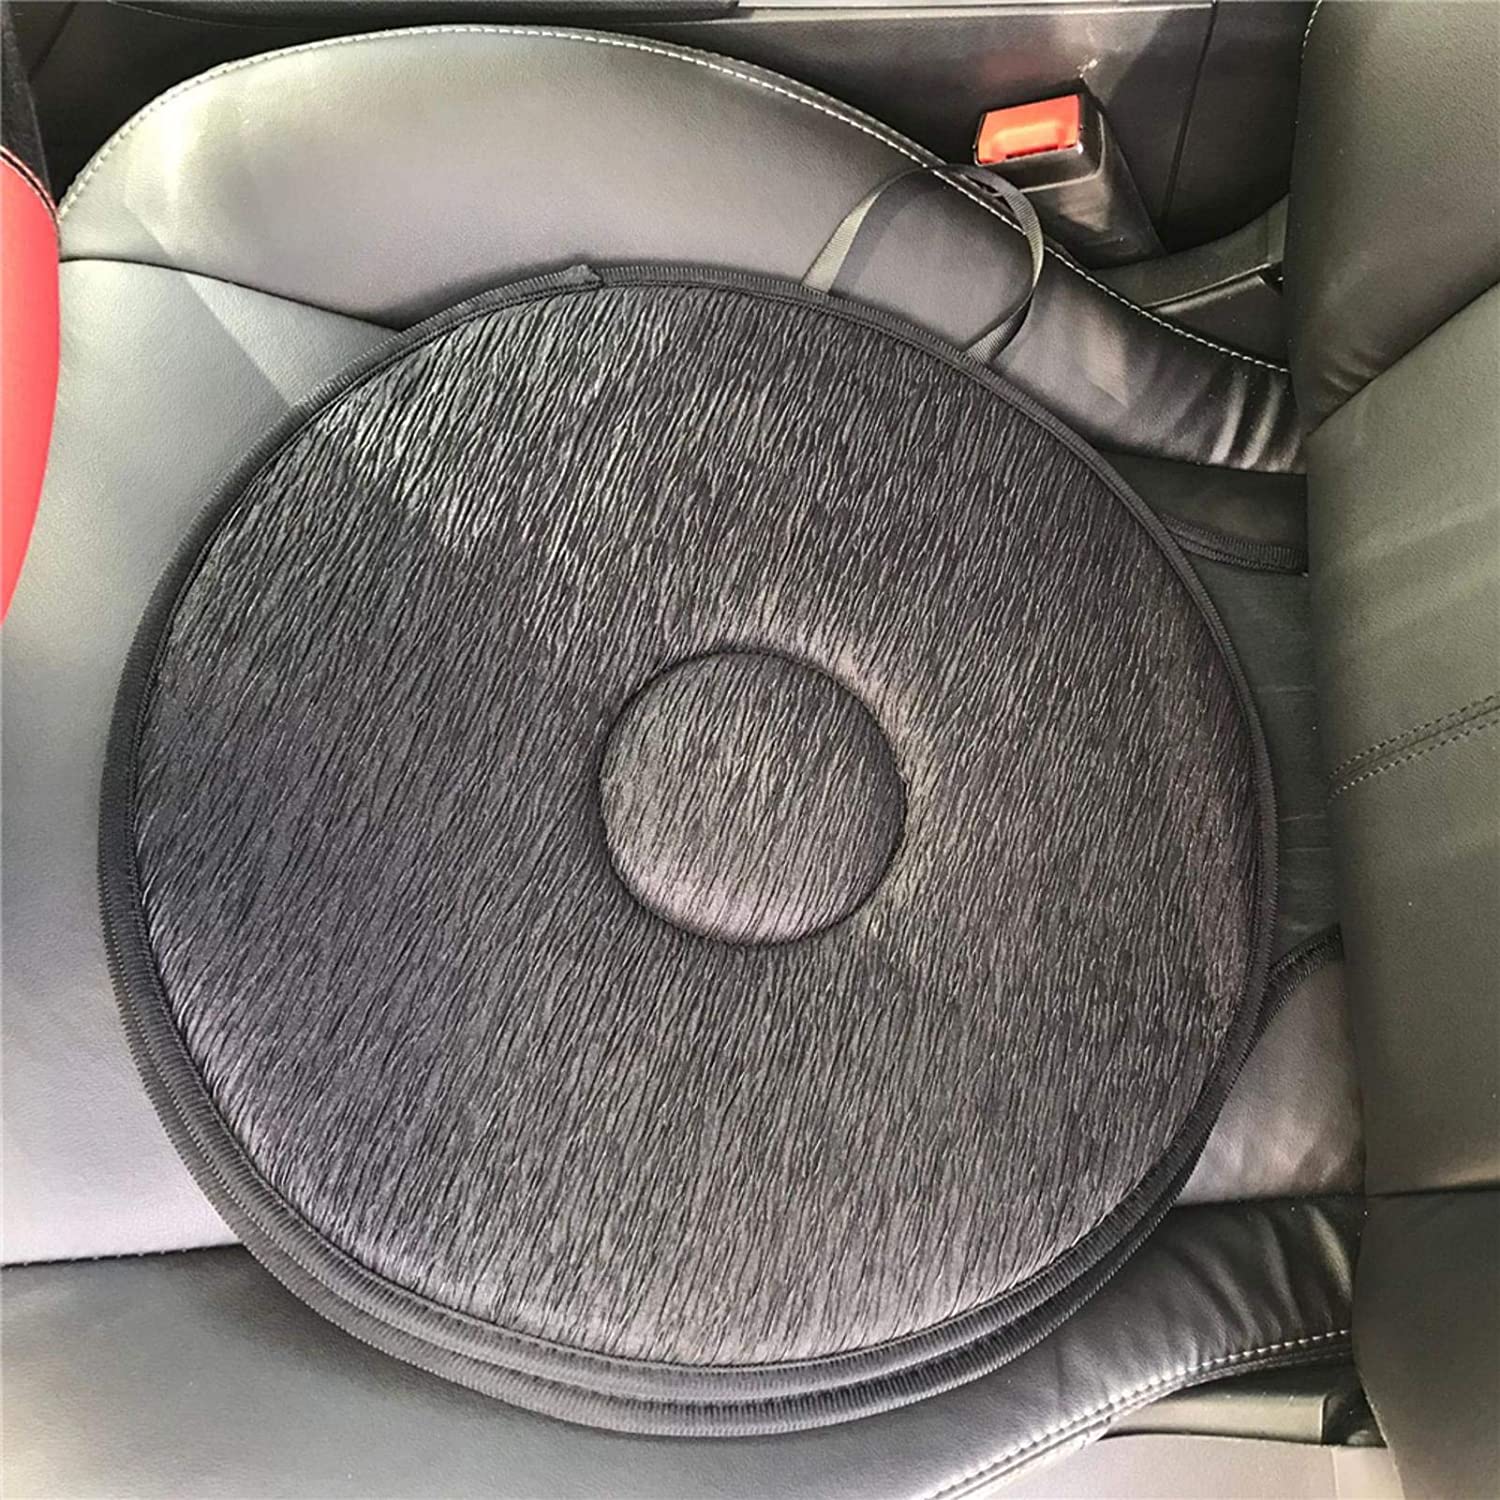 hinffinity Rotating Car Seat Swivel Cushion Round Foam Non-Slip Mobility Aid for Kids, Elderly, Pregnant Women, Truck Drivers